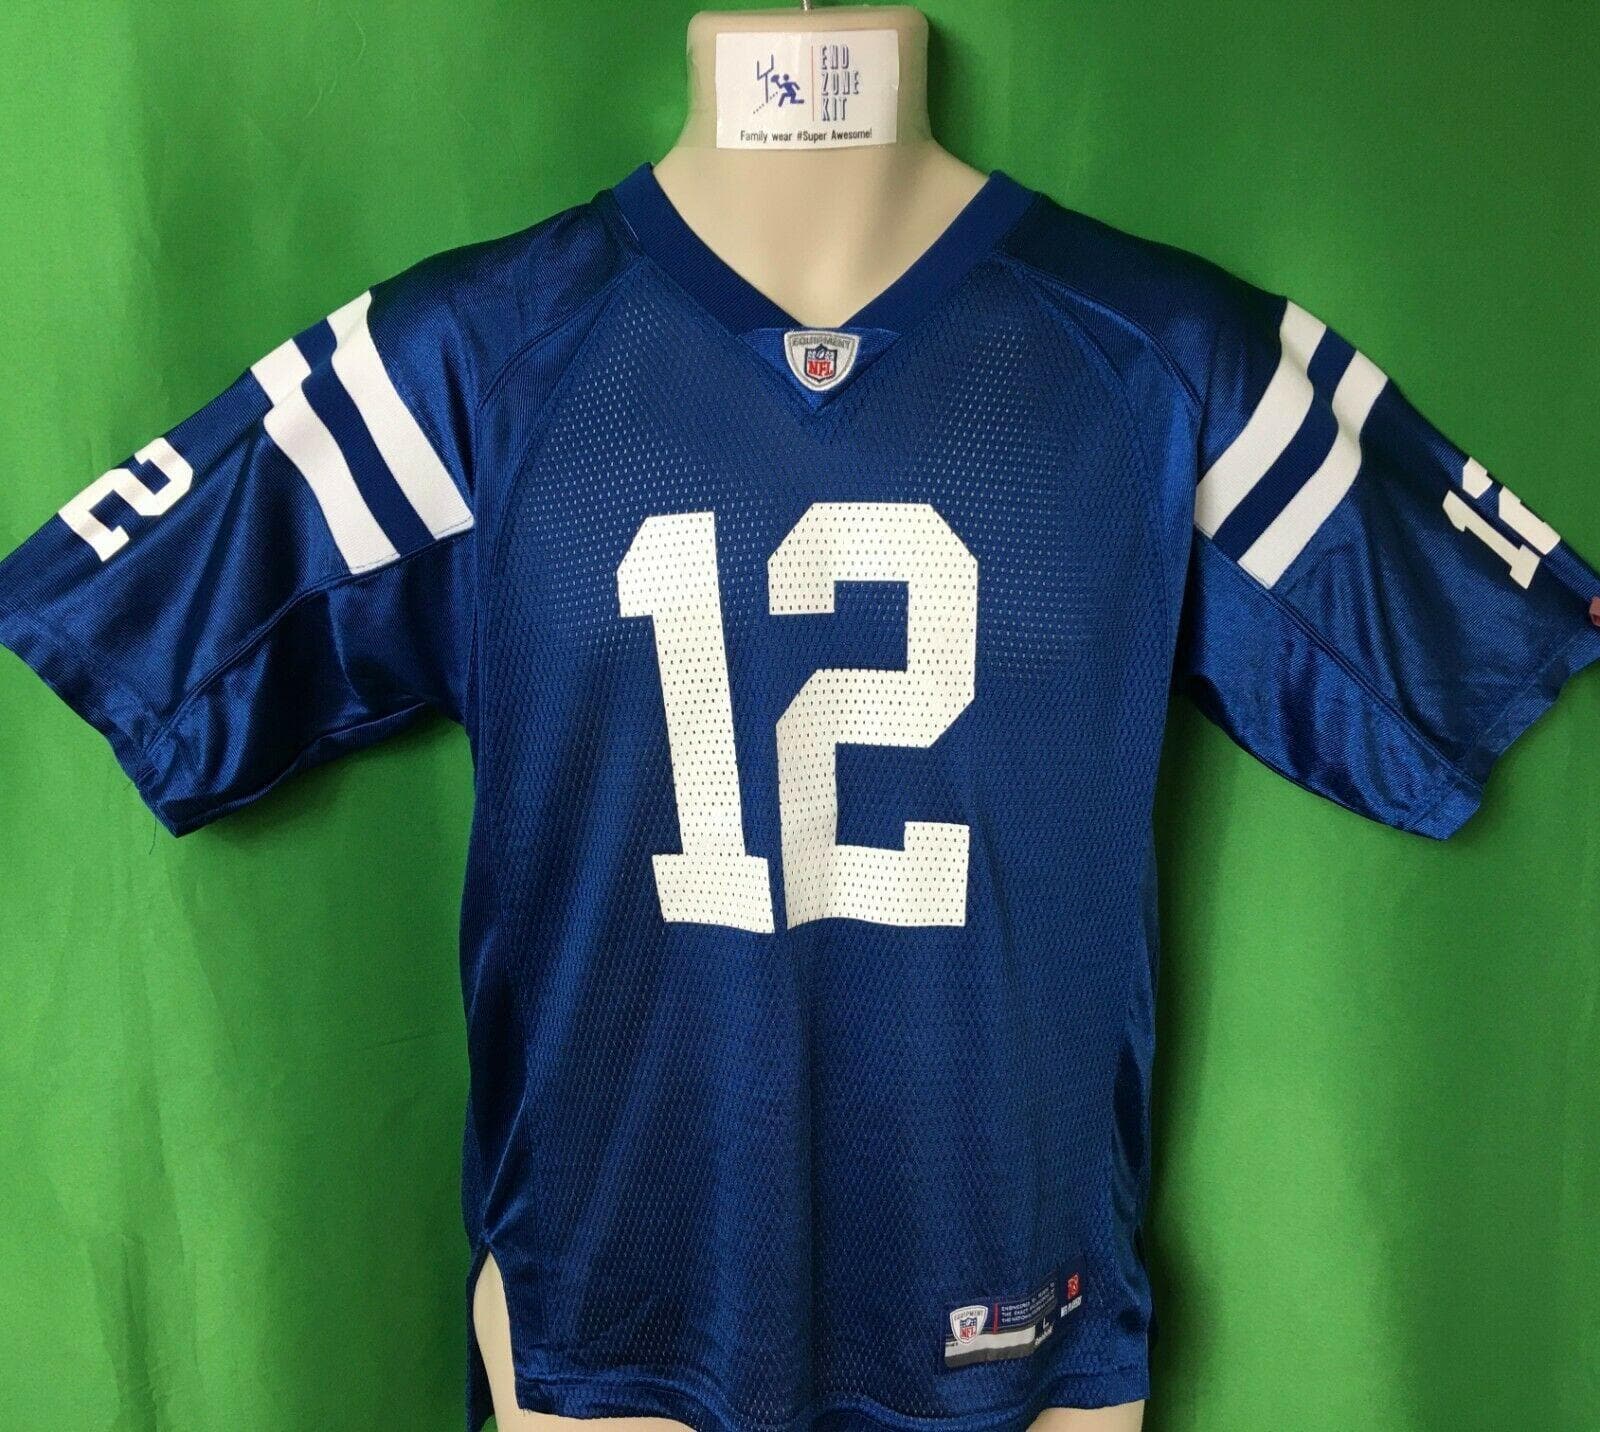 NFL Indianapolis Colts Andrew Luck #12 Jersey Youth Large 14-16